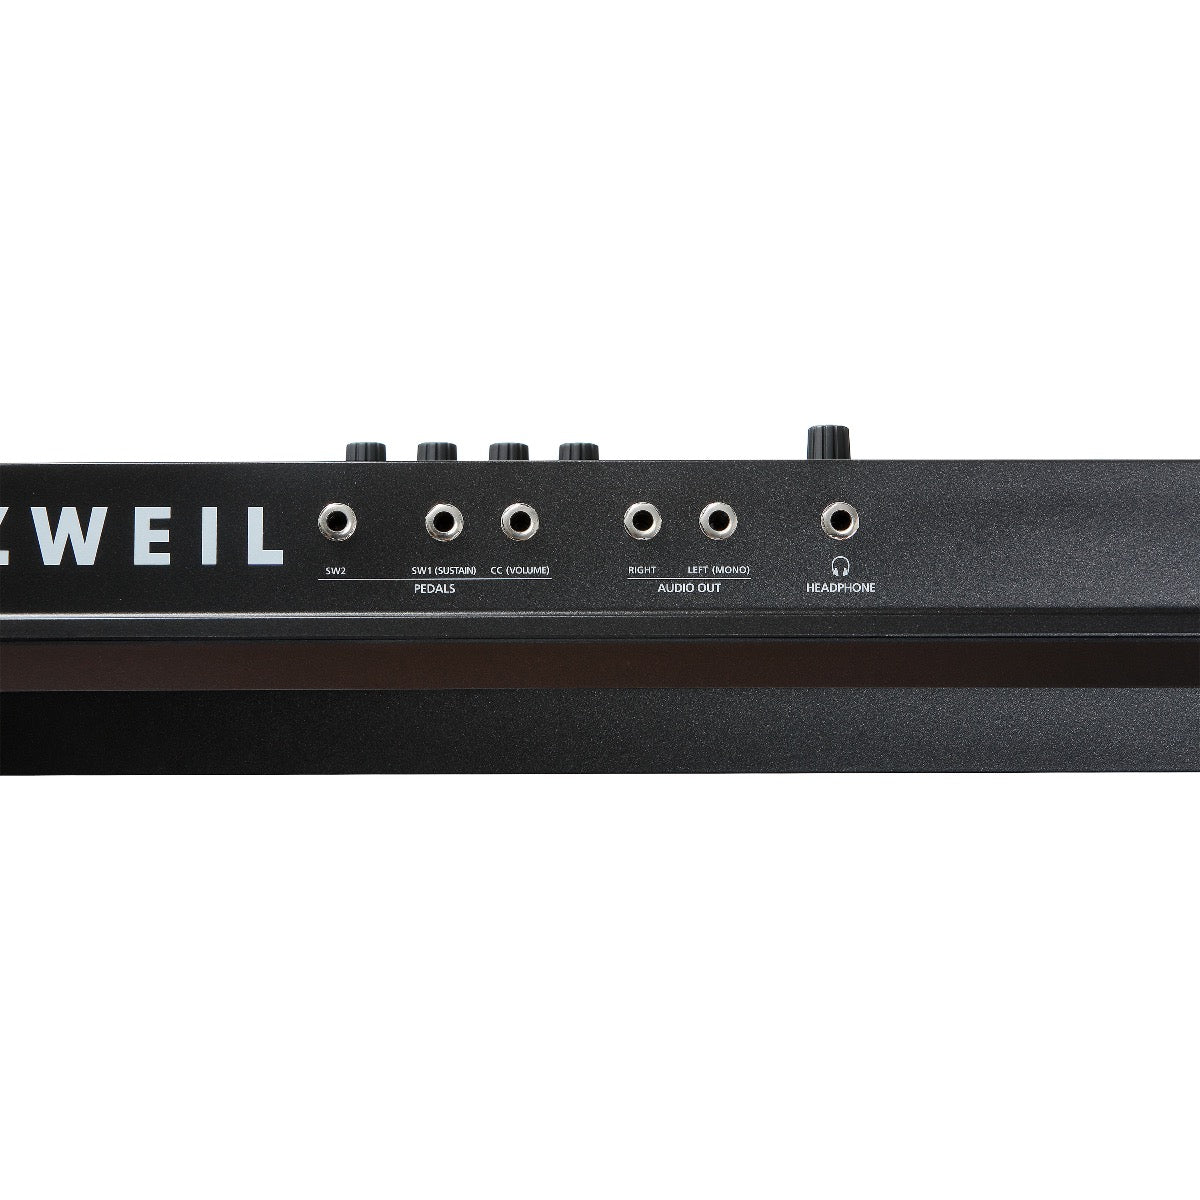 Rear detail view of Kurzweil SP6-7 76-Key Stage Piano showing pedal and audio connections